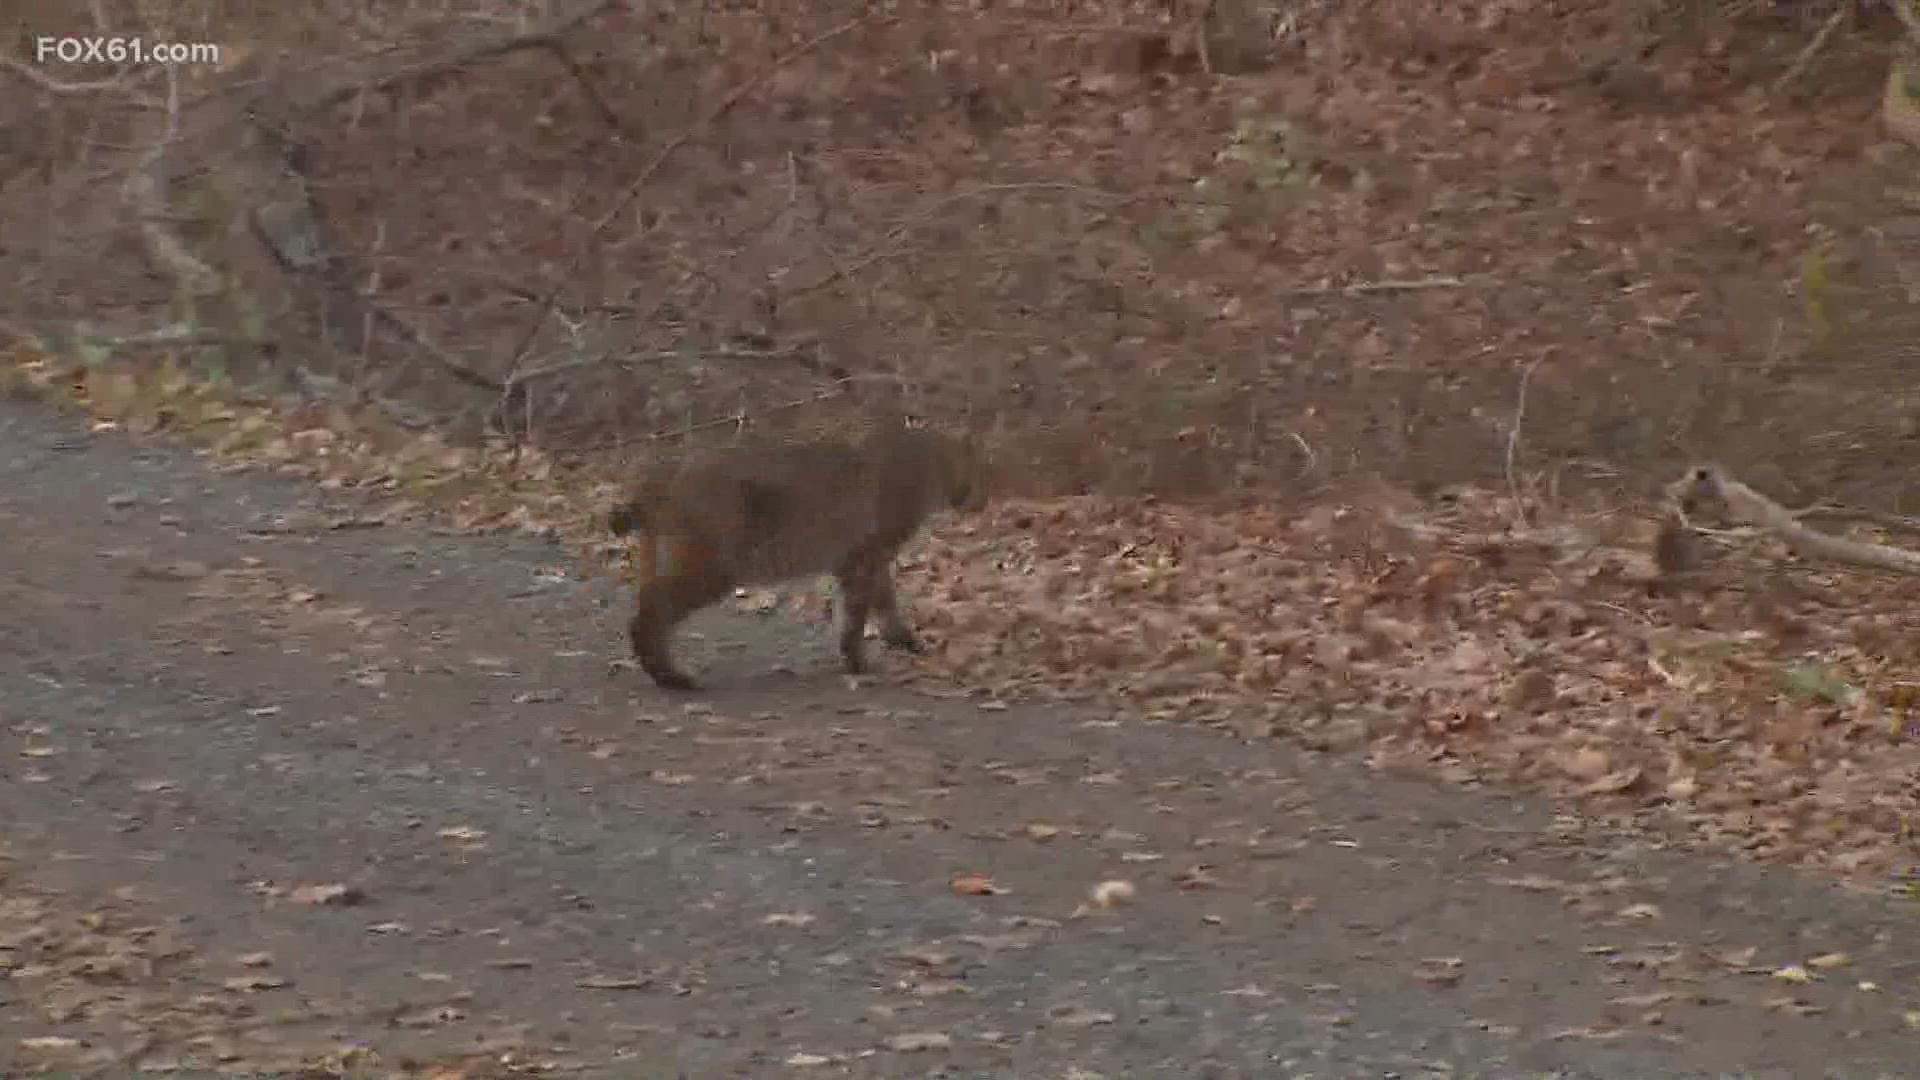 Wildlife experts with The Department of Energy and Environmental Protection say two bobcats were recently spotted in Hartford.